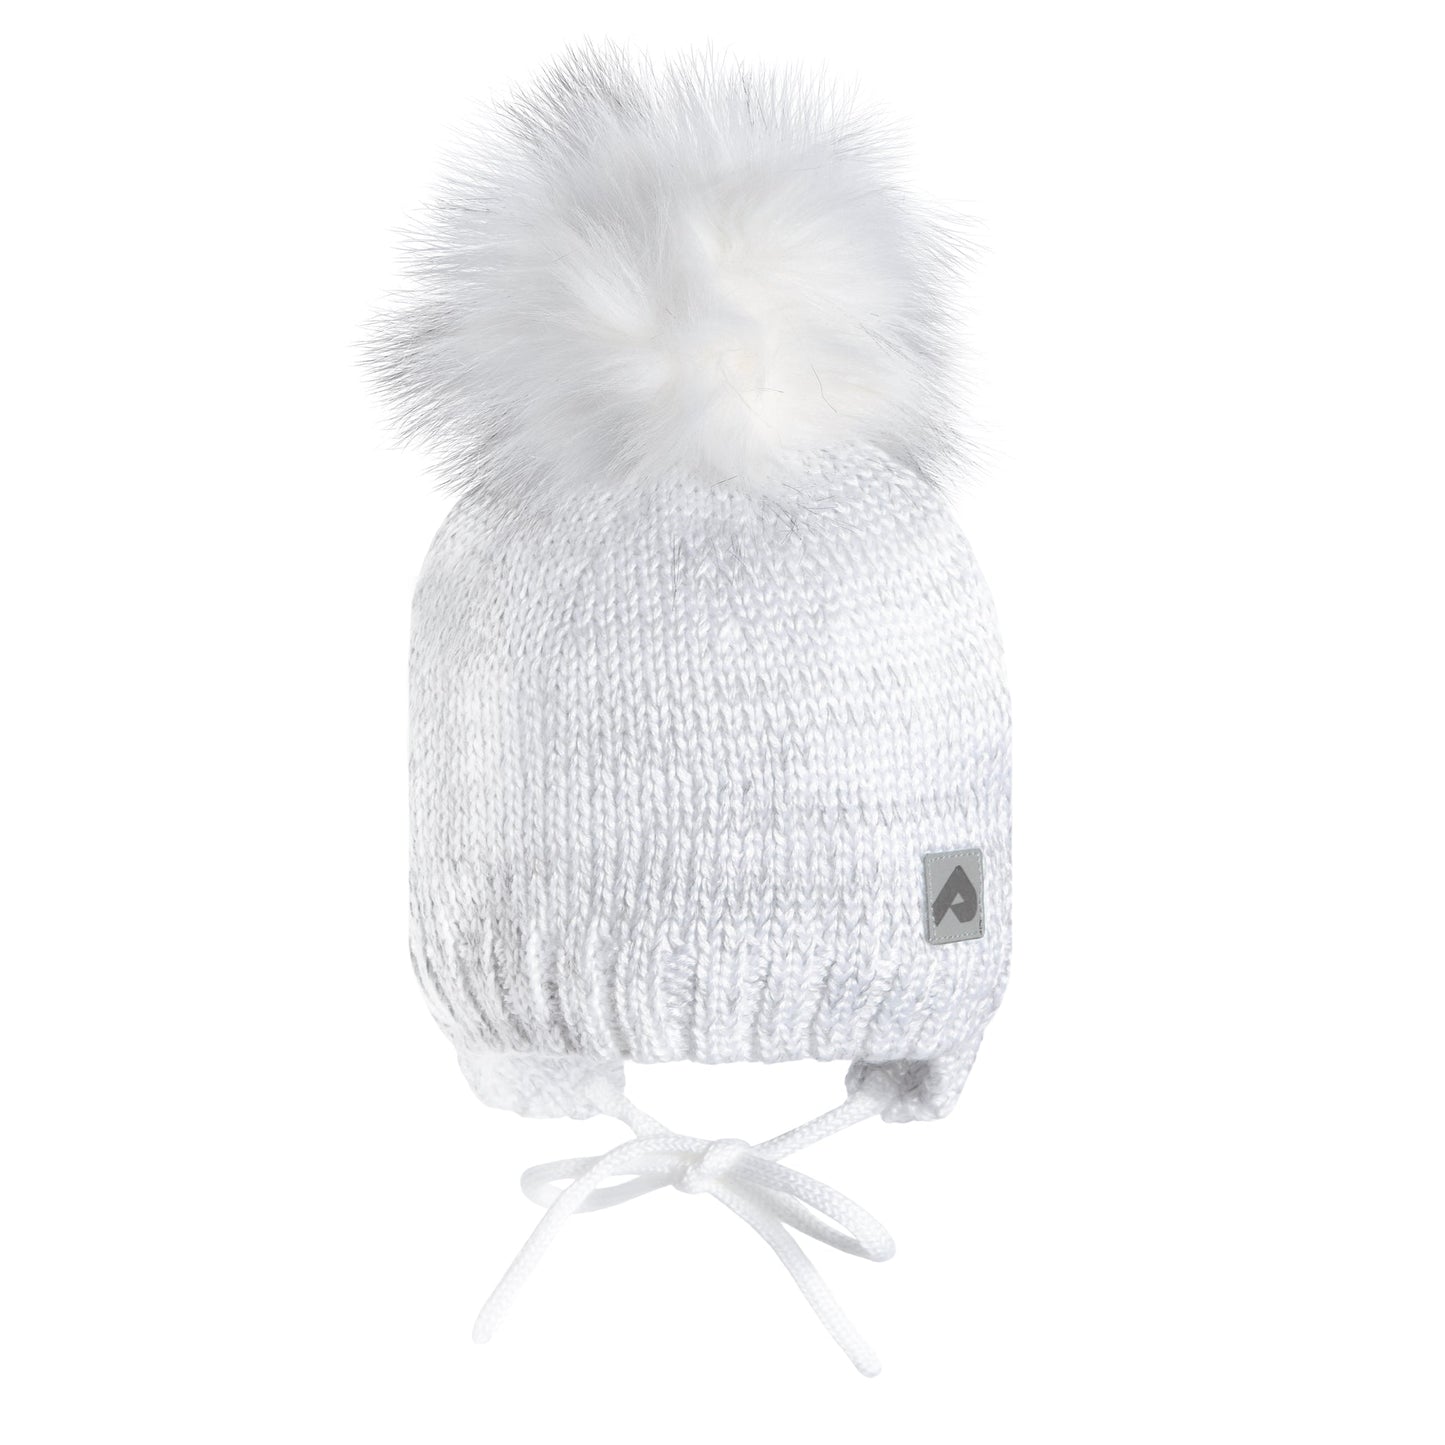 Acrylic hat with fleece lining and ears - Multi White